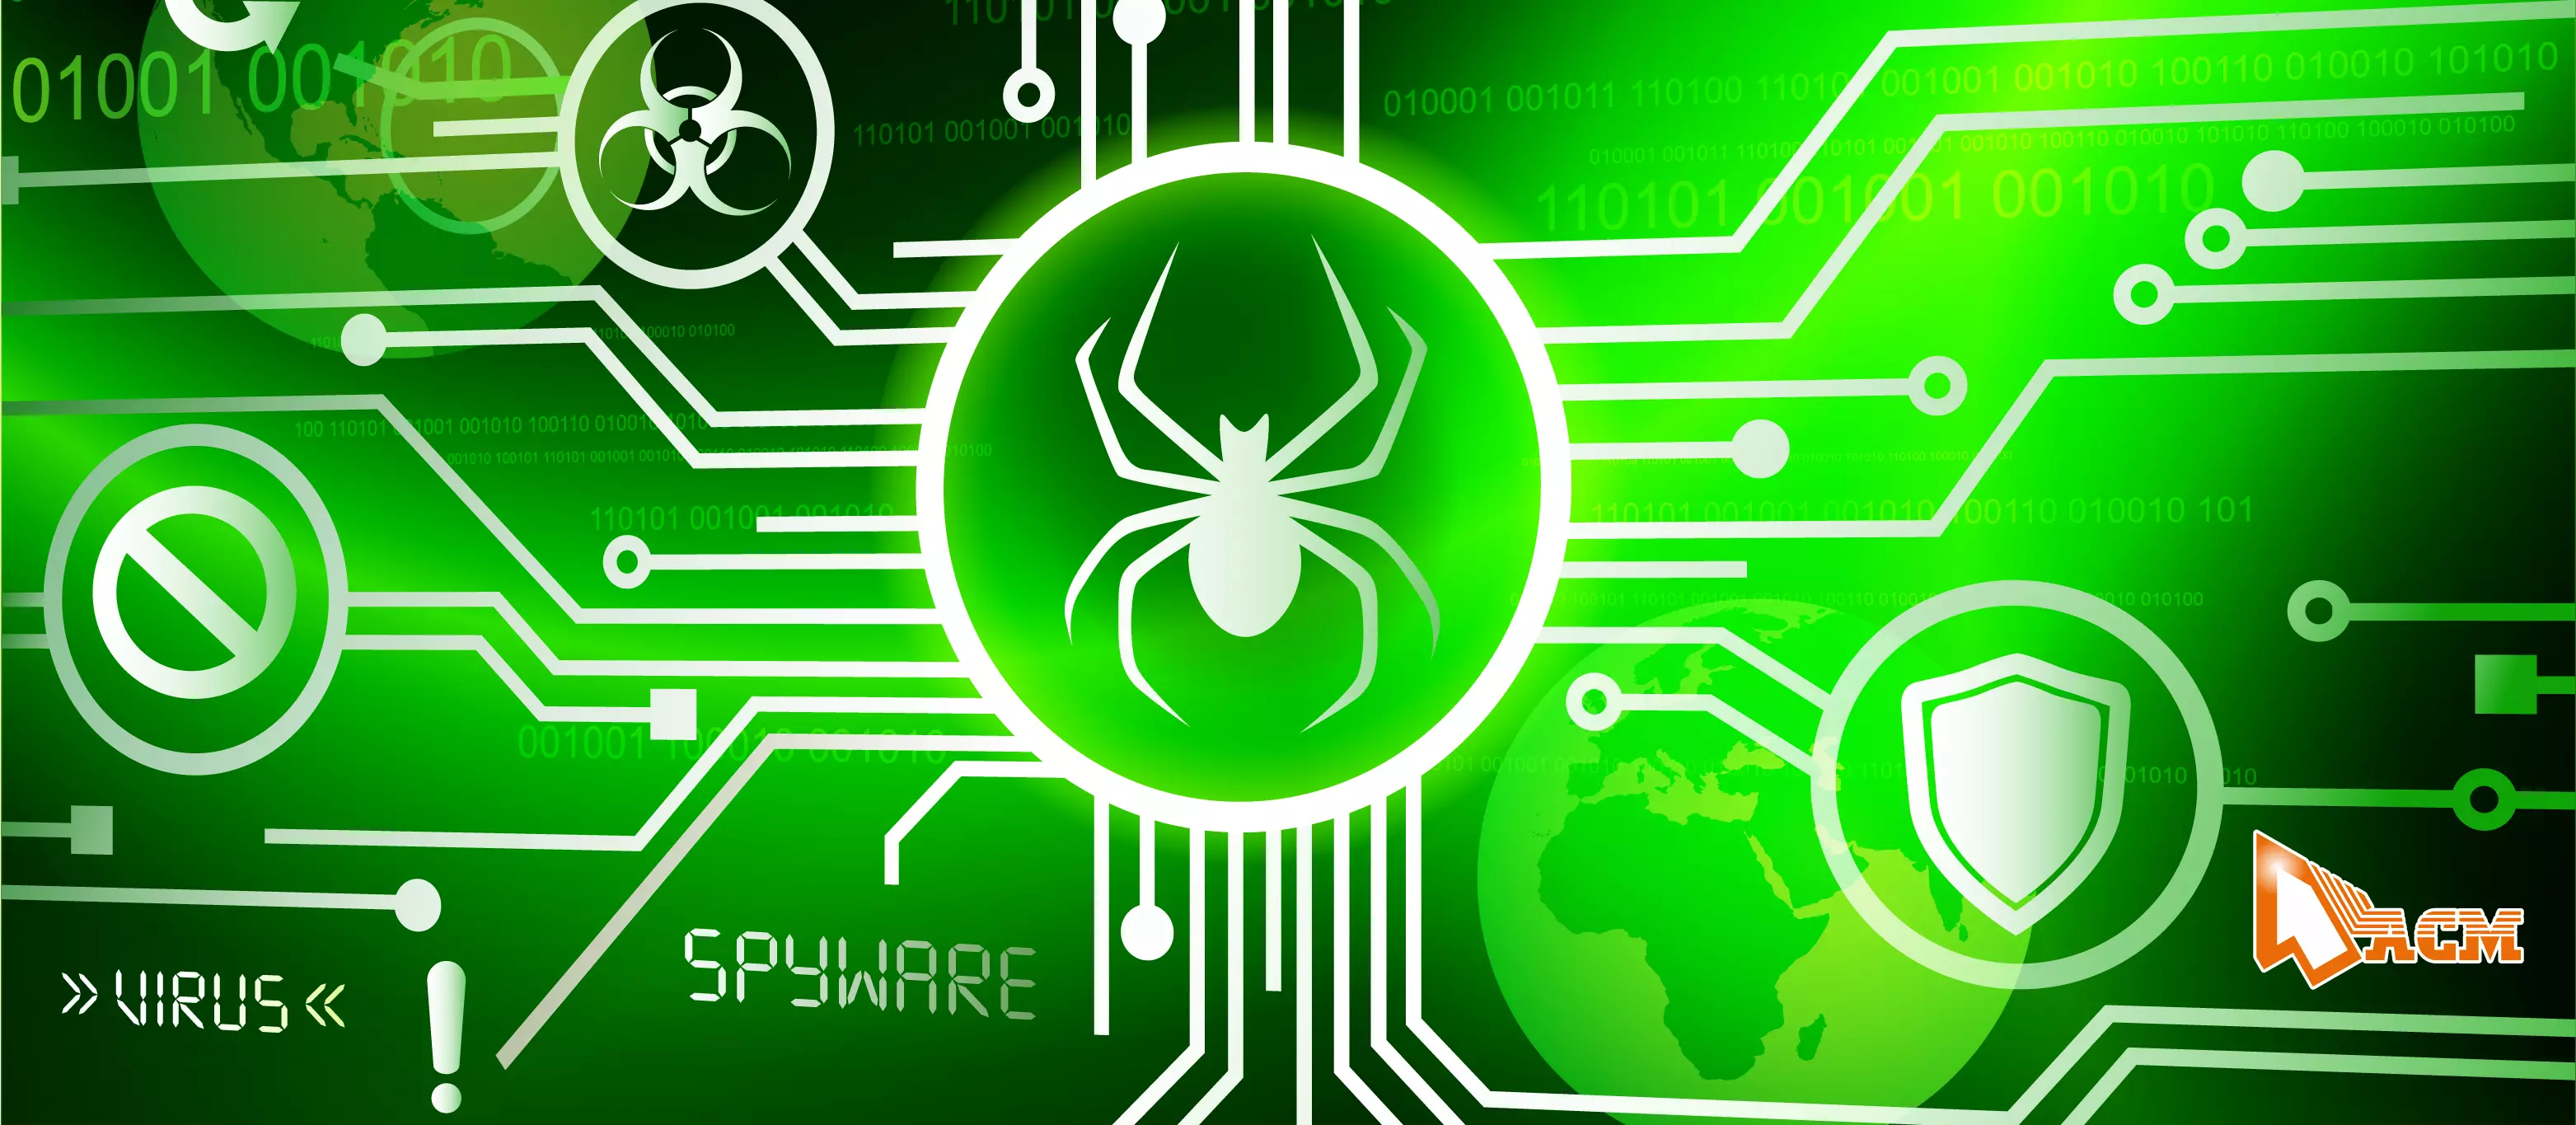 What is spyware?